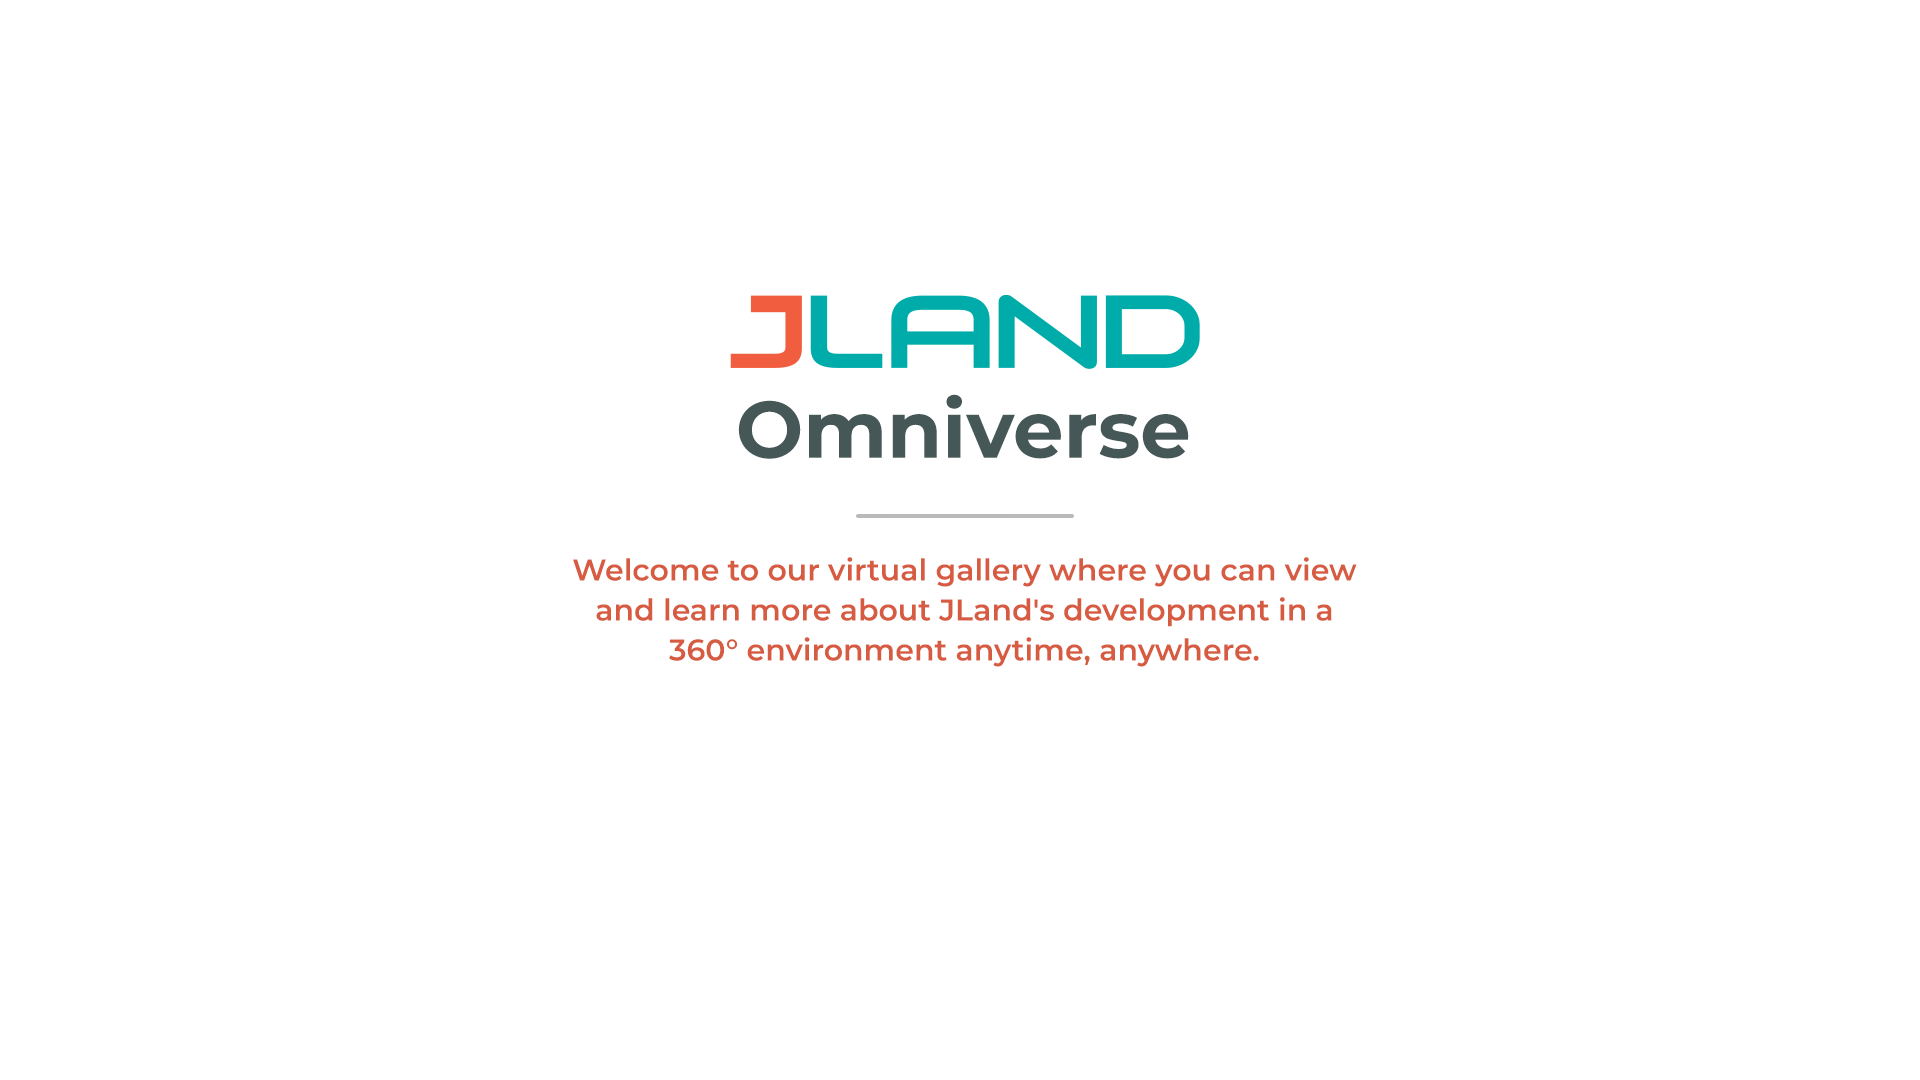 JLAND Welcome to our virtual gallery tour!